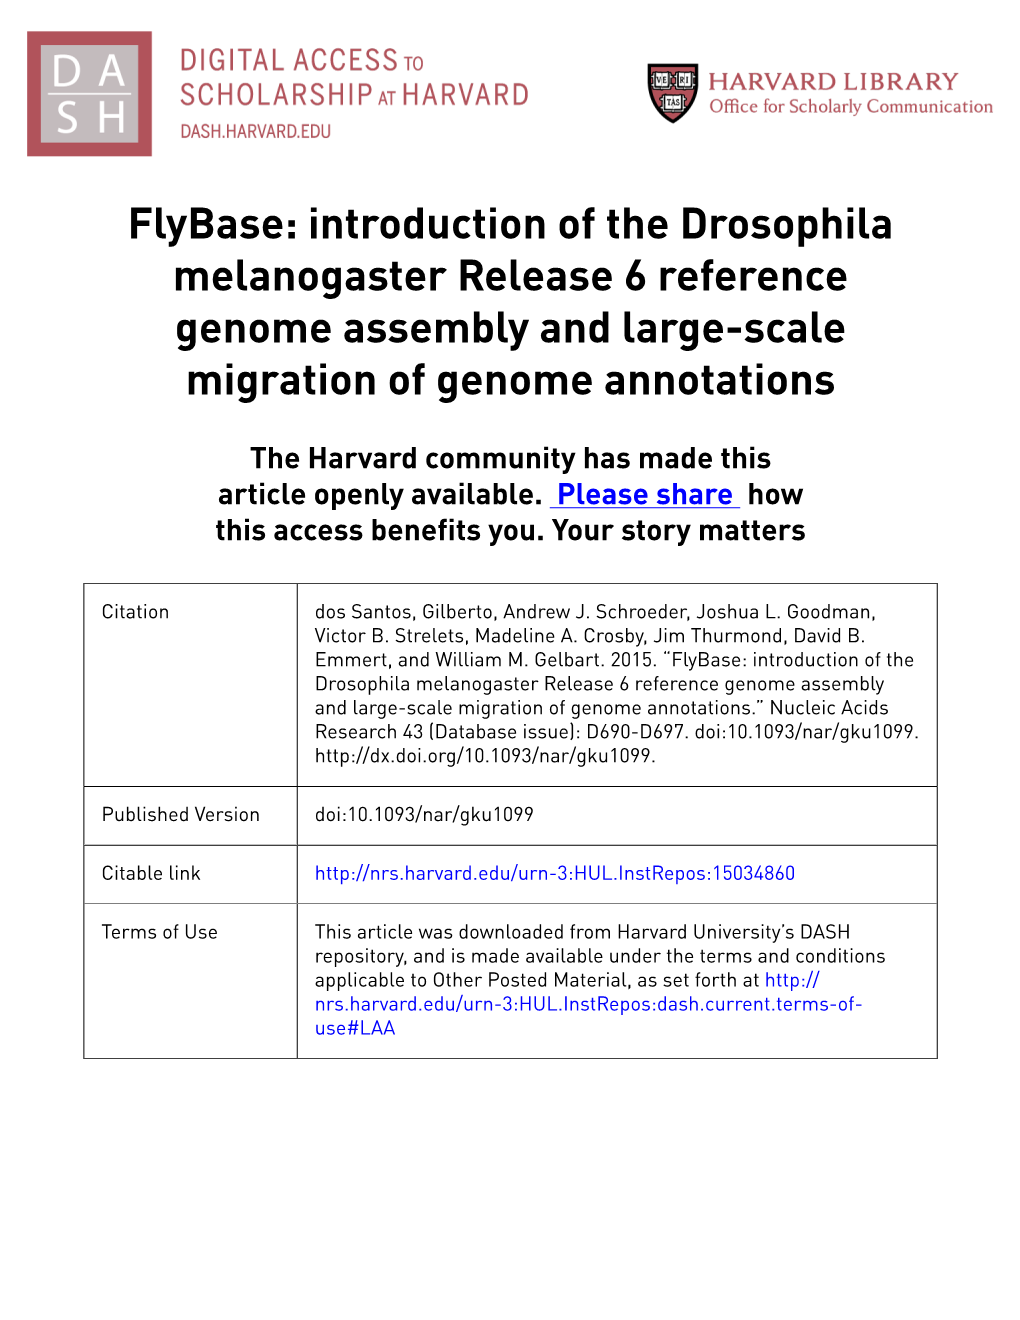 Flybase: Introduction of the Drosophila Melanogaster Release 6 Reference Genome Assembly and Large-Scale Migration of Genome Annotations